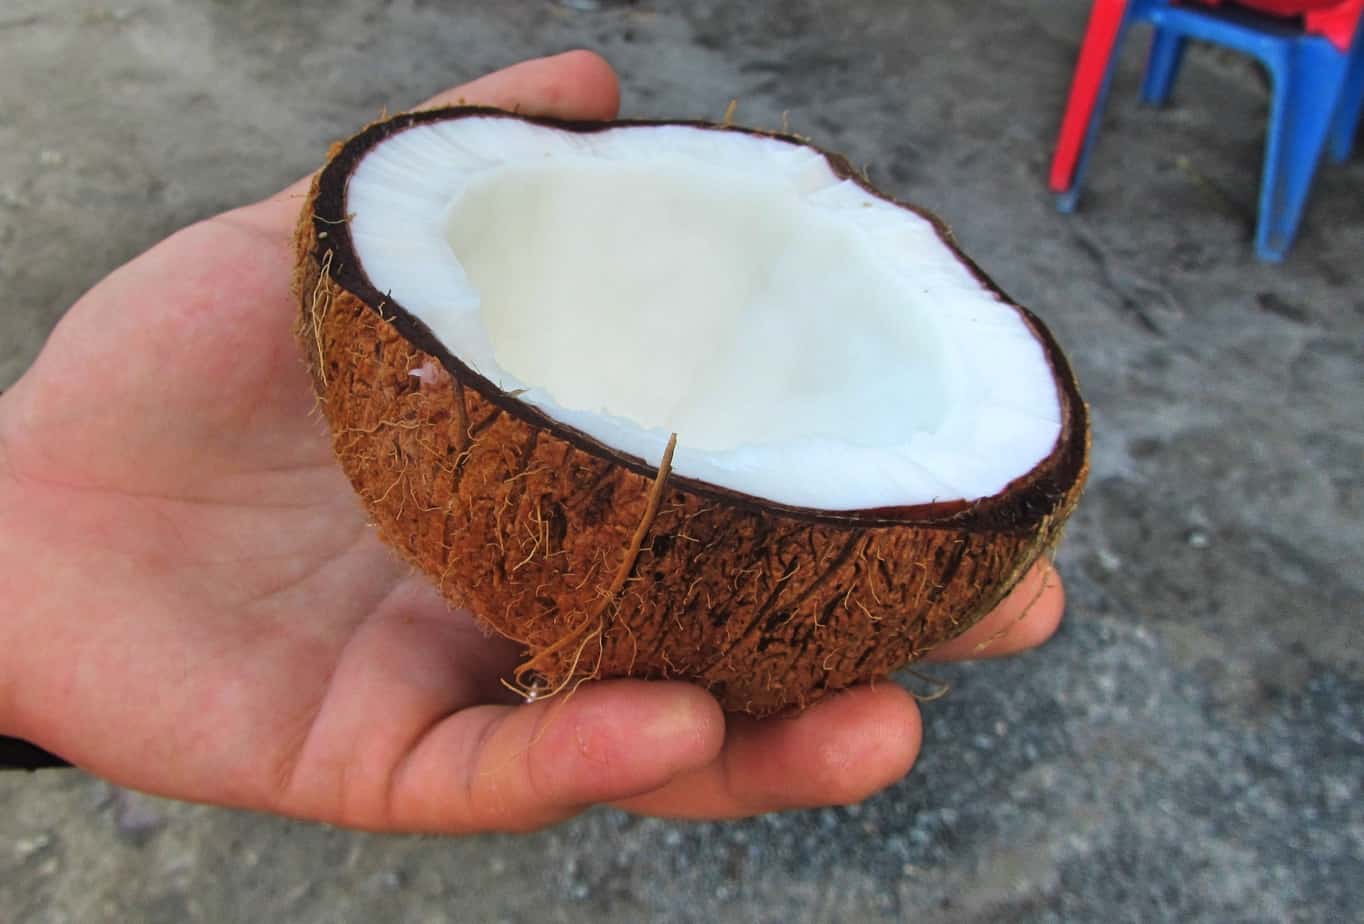 Coconut from the market